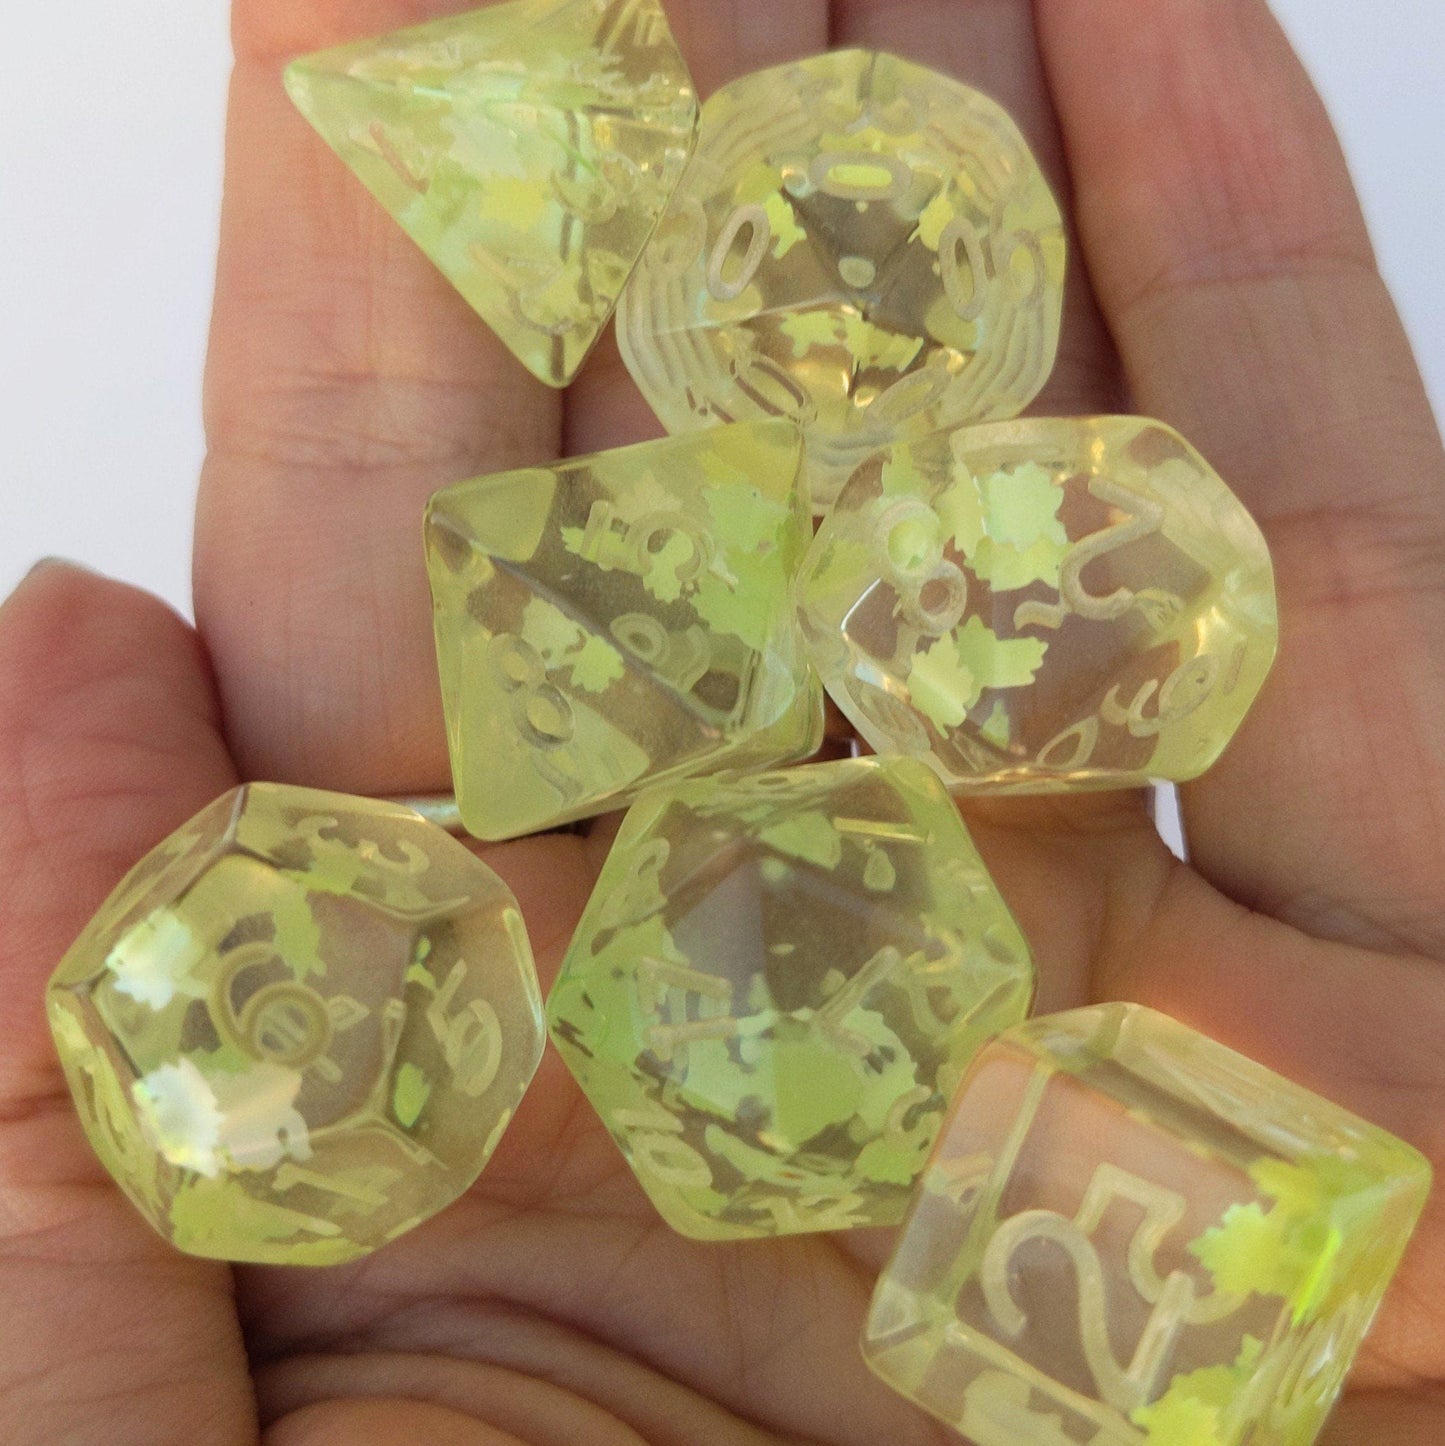 Un-inked Feywild Dice Set. Clear resin with light green leaves - CozyGamer